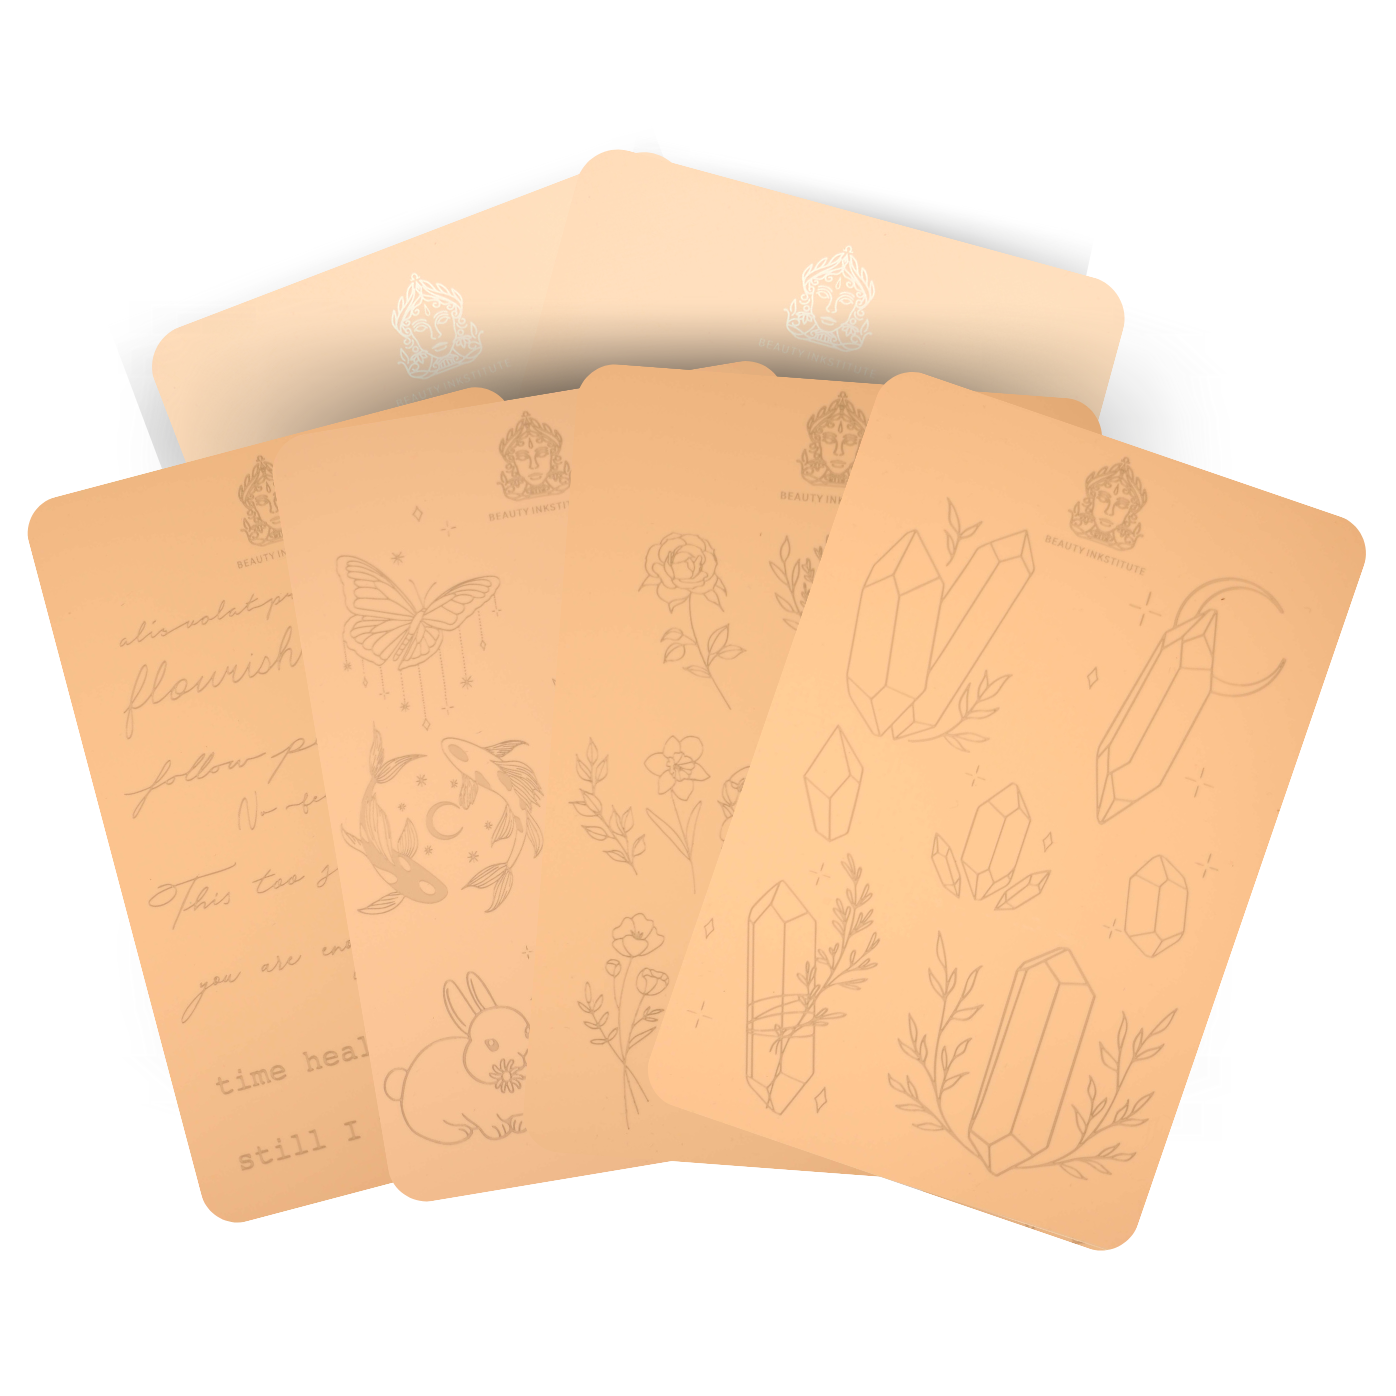 Inklusive Printed Silicone Skins 4 Pack + 2 Plain Silicone Sheets